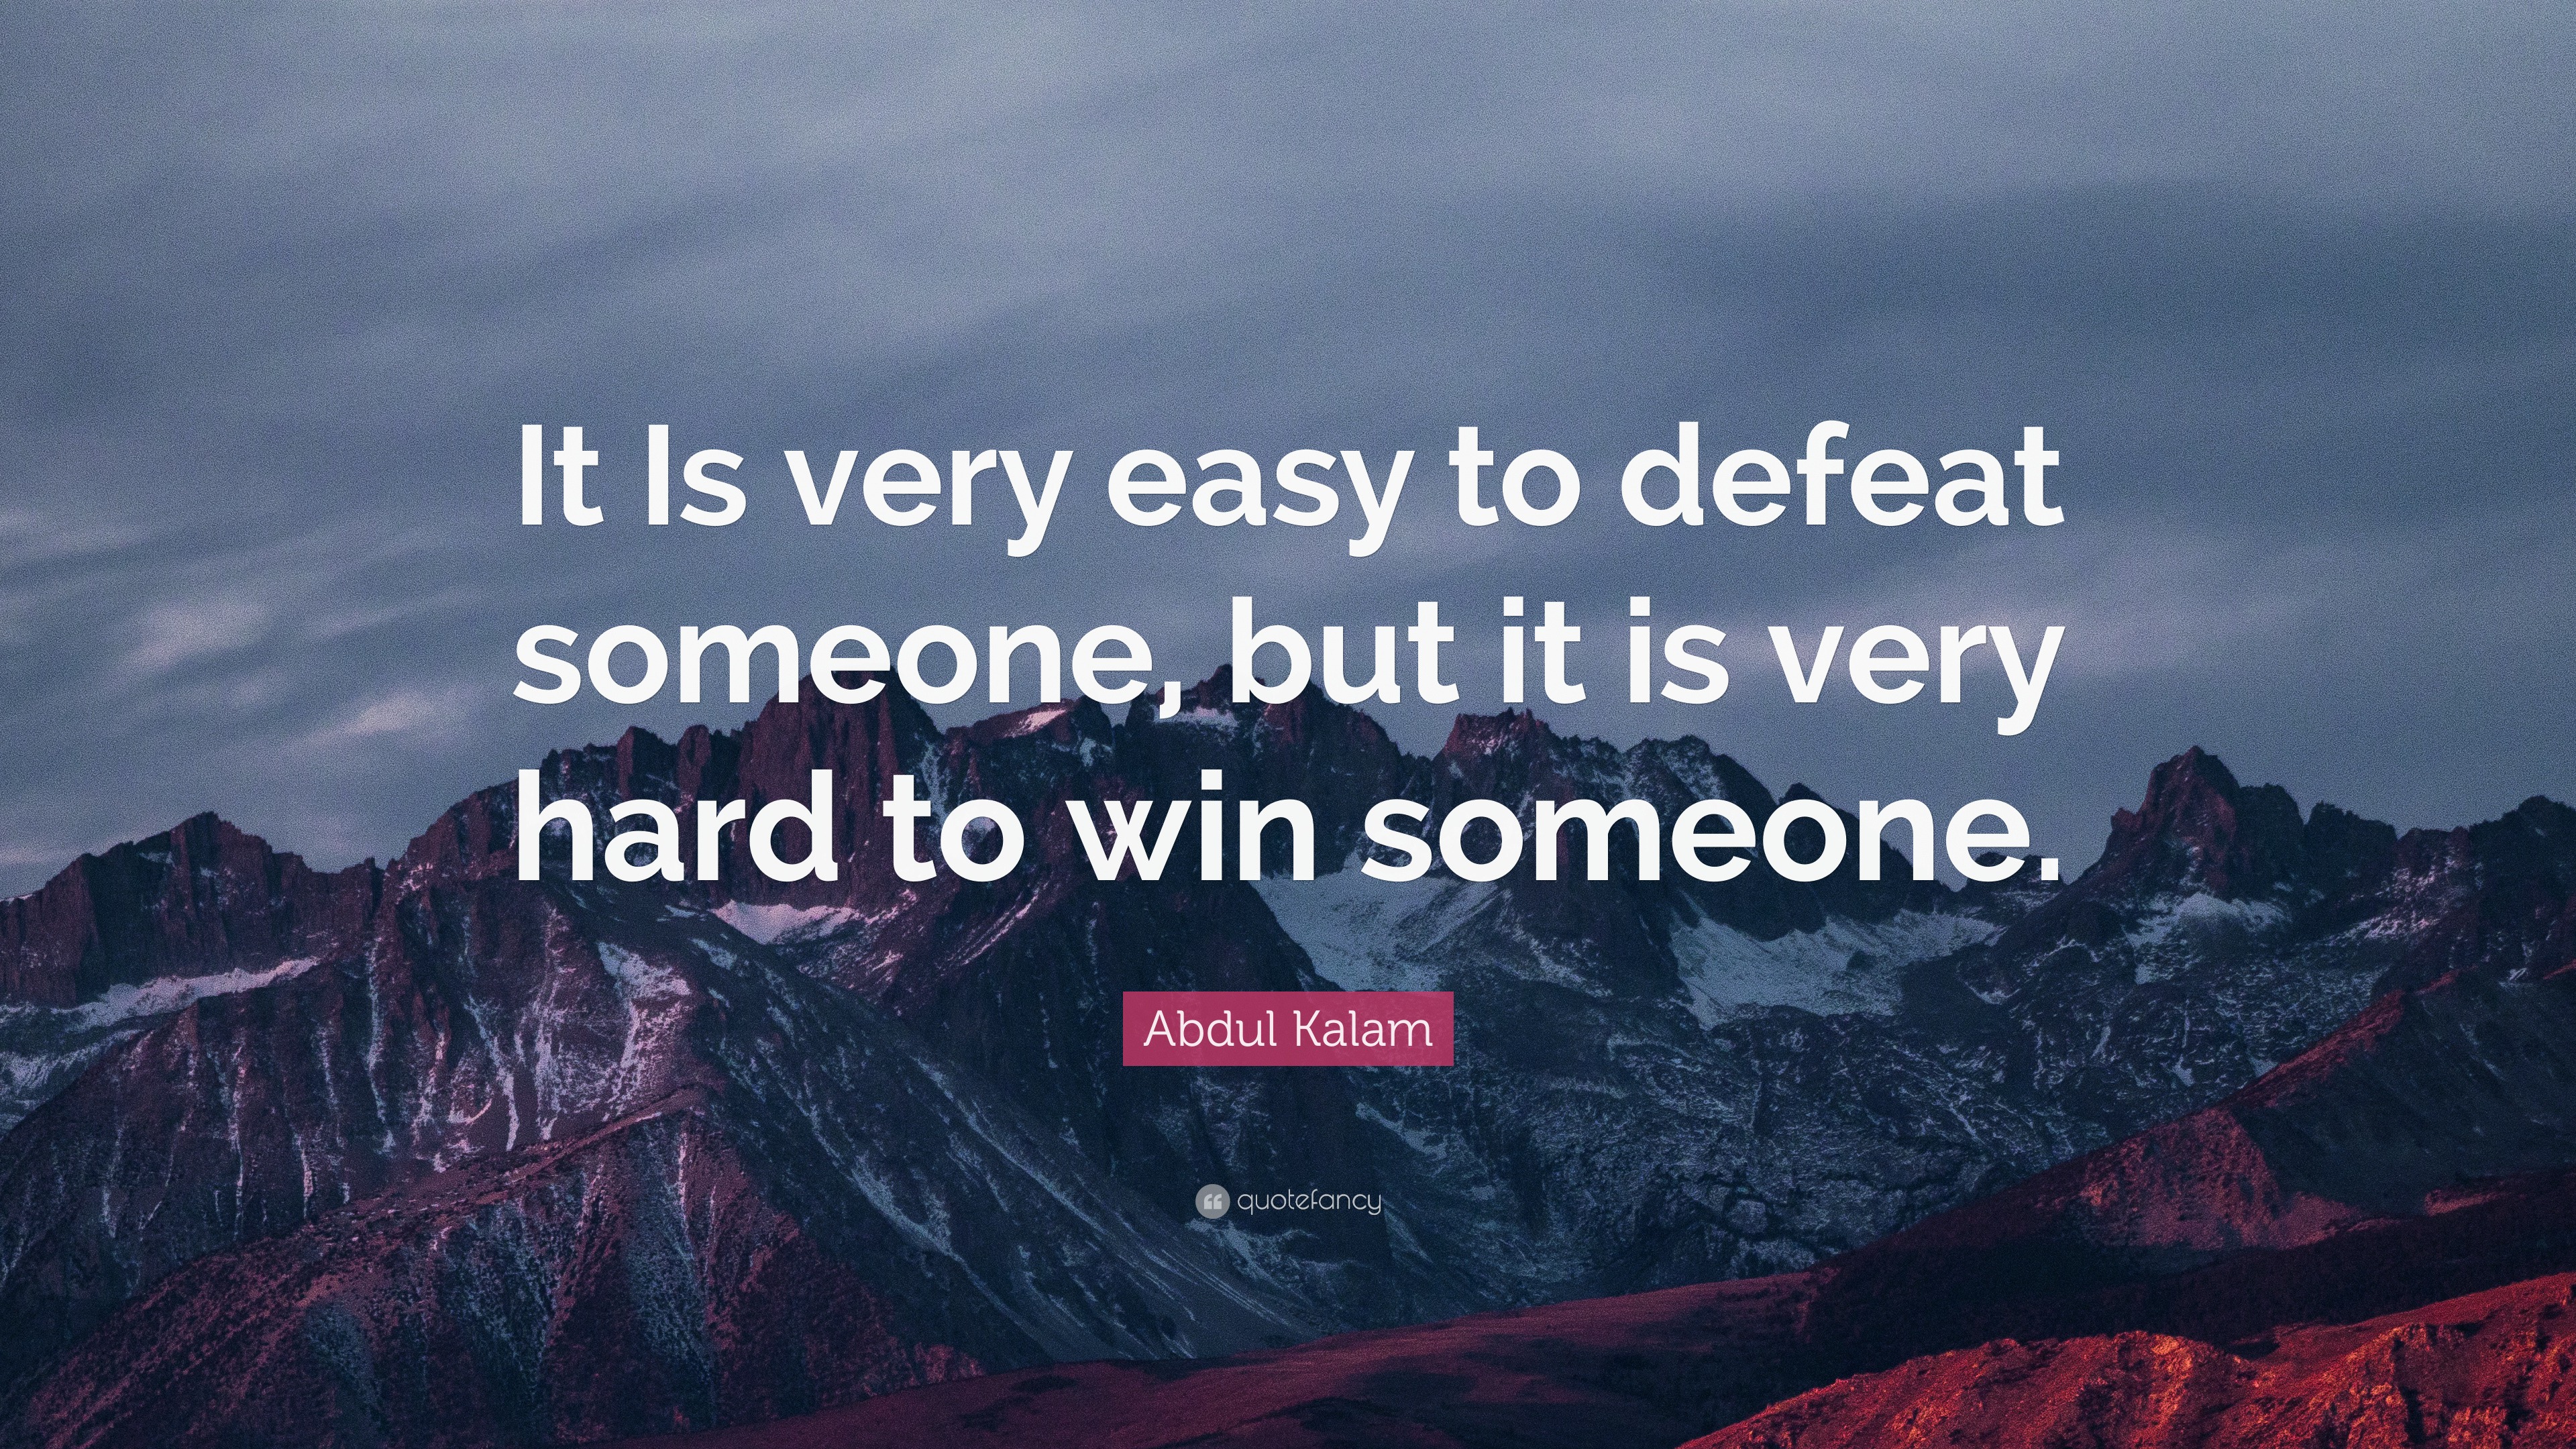 Abdul Kalam Quote: “It Is very easy to defeat someone, but it is very ...